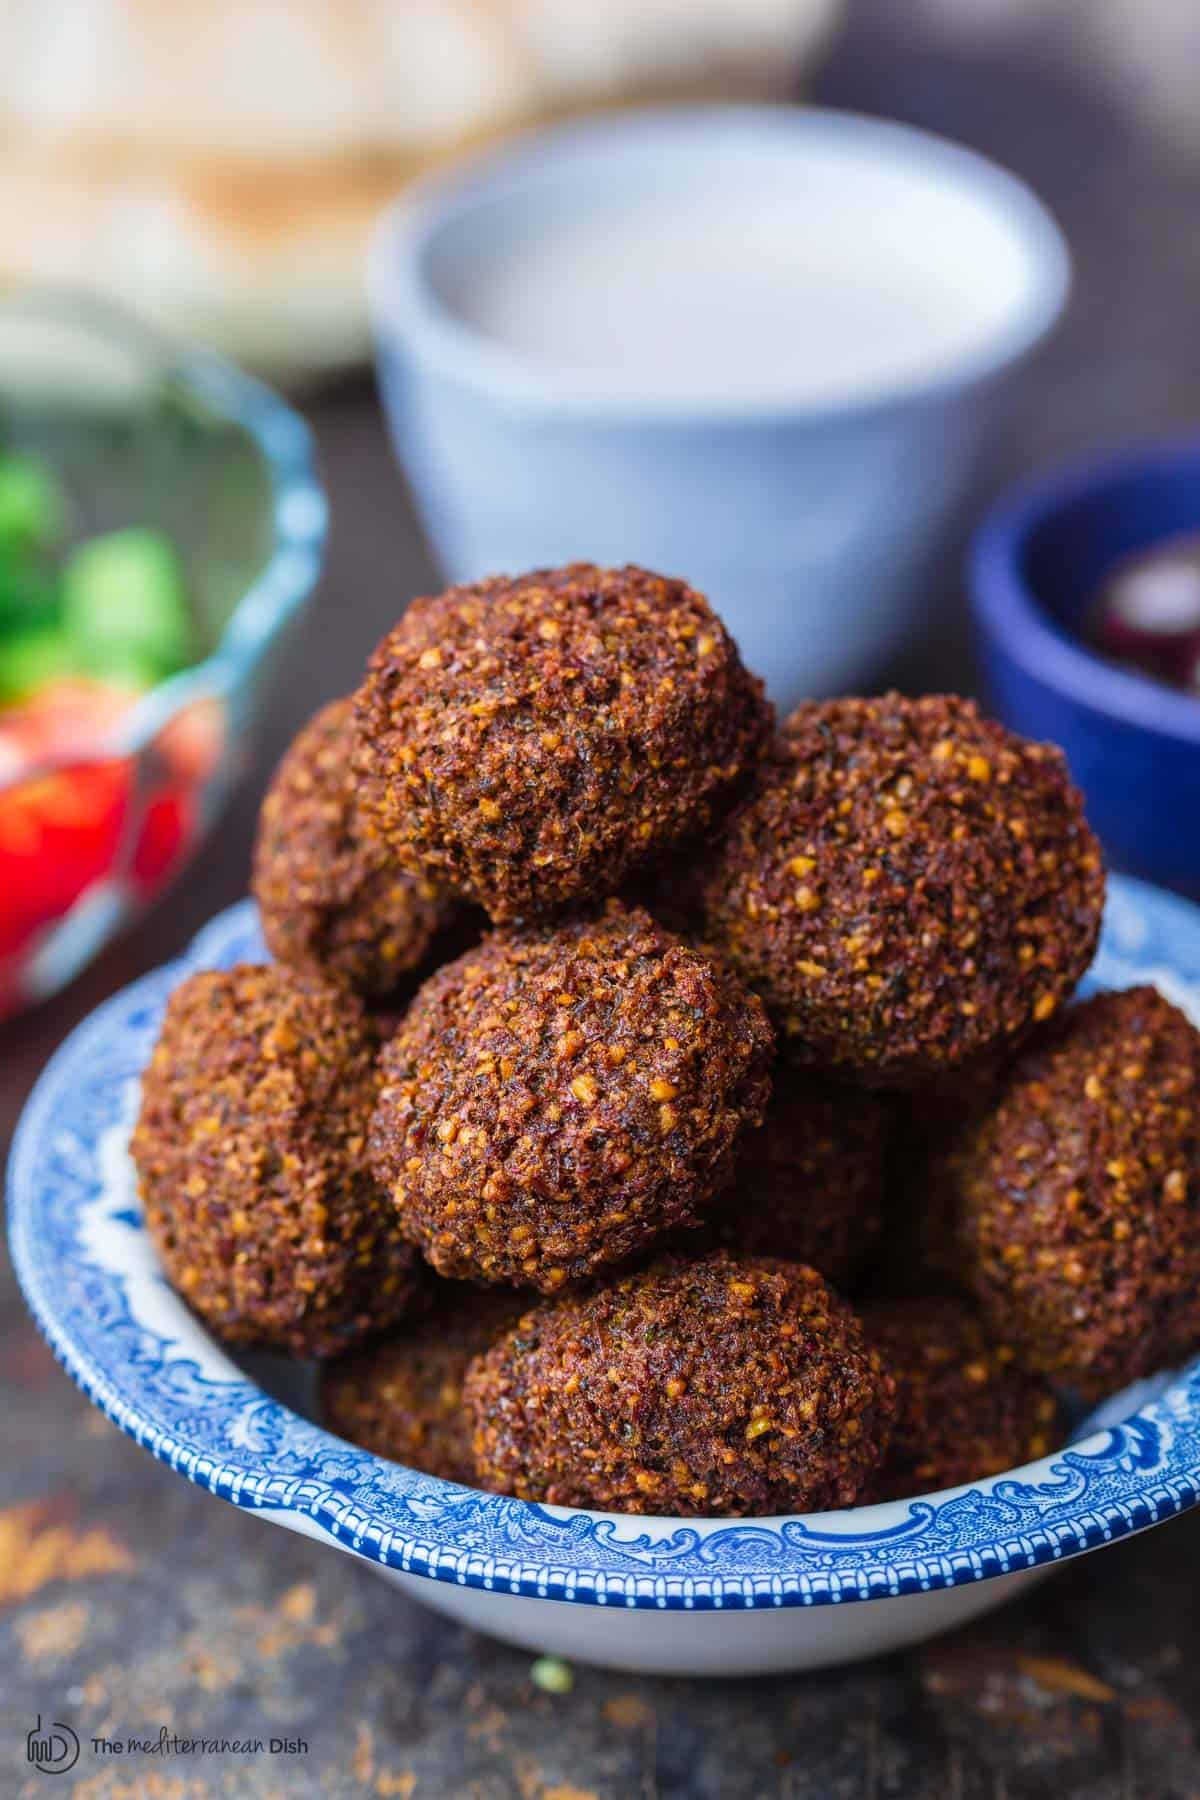 Easy Authentic Falafel Recipe: Step-by-Step | The Mediterranean Dish